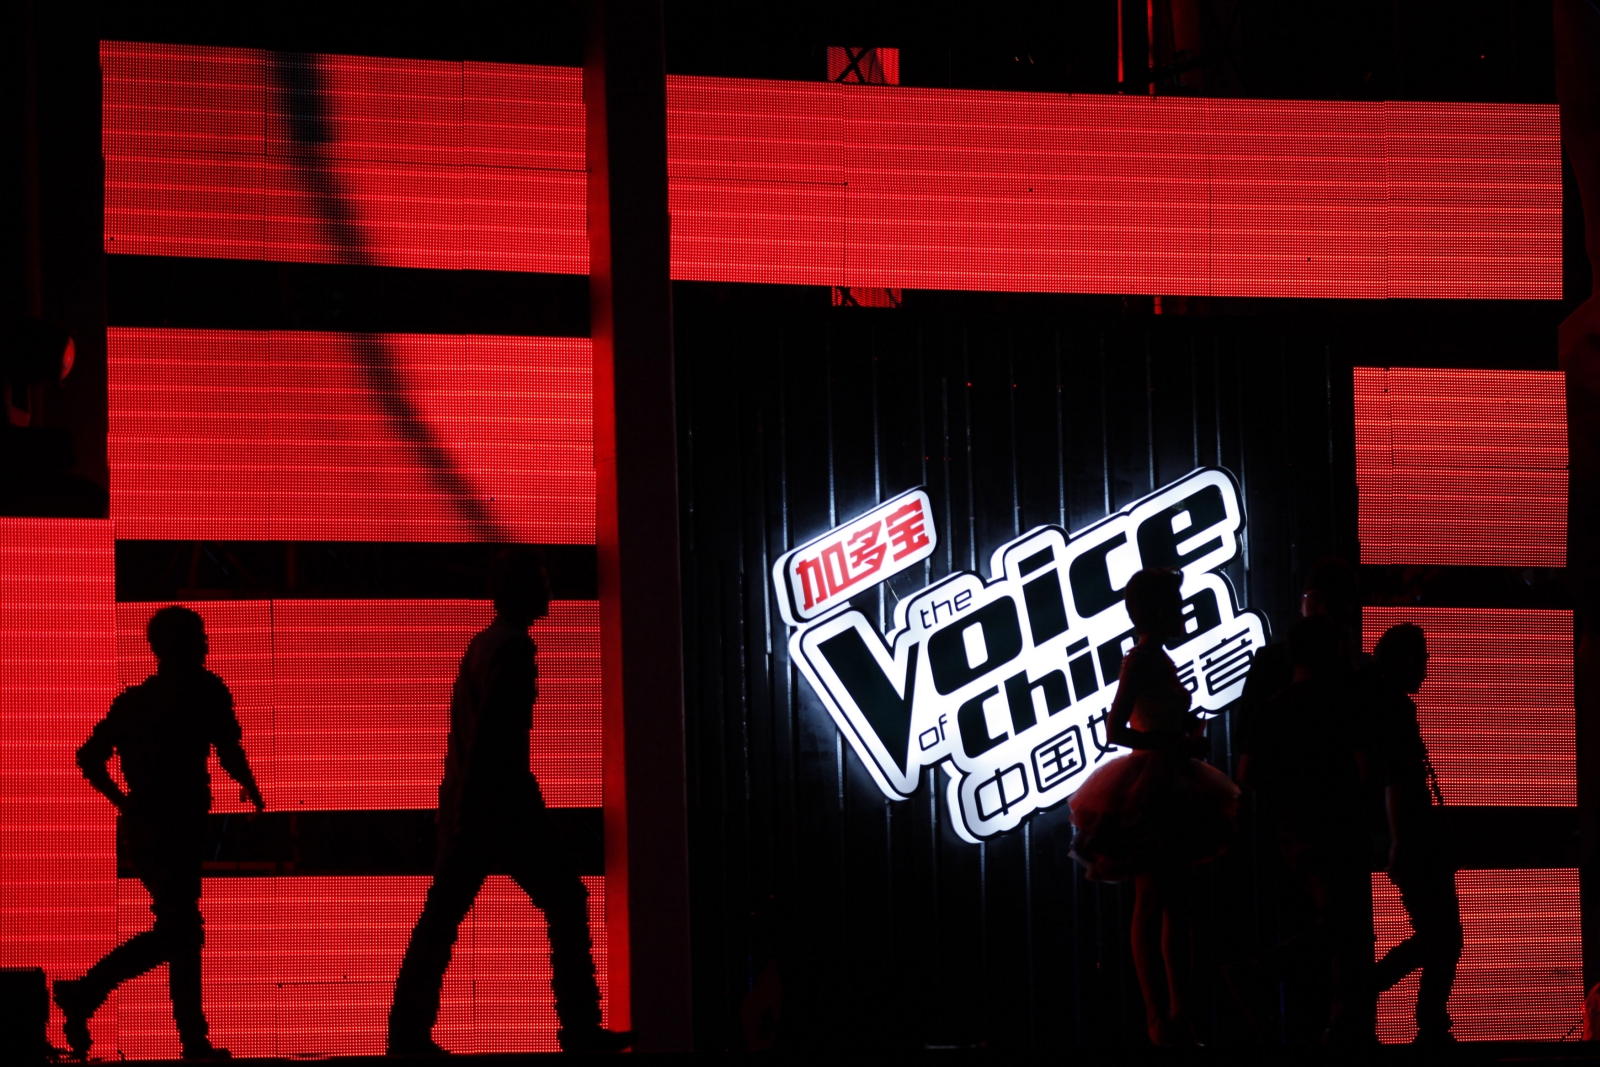 China cracks down on foreigninspired TV shows such as The Voice